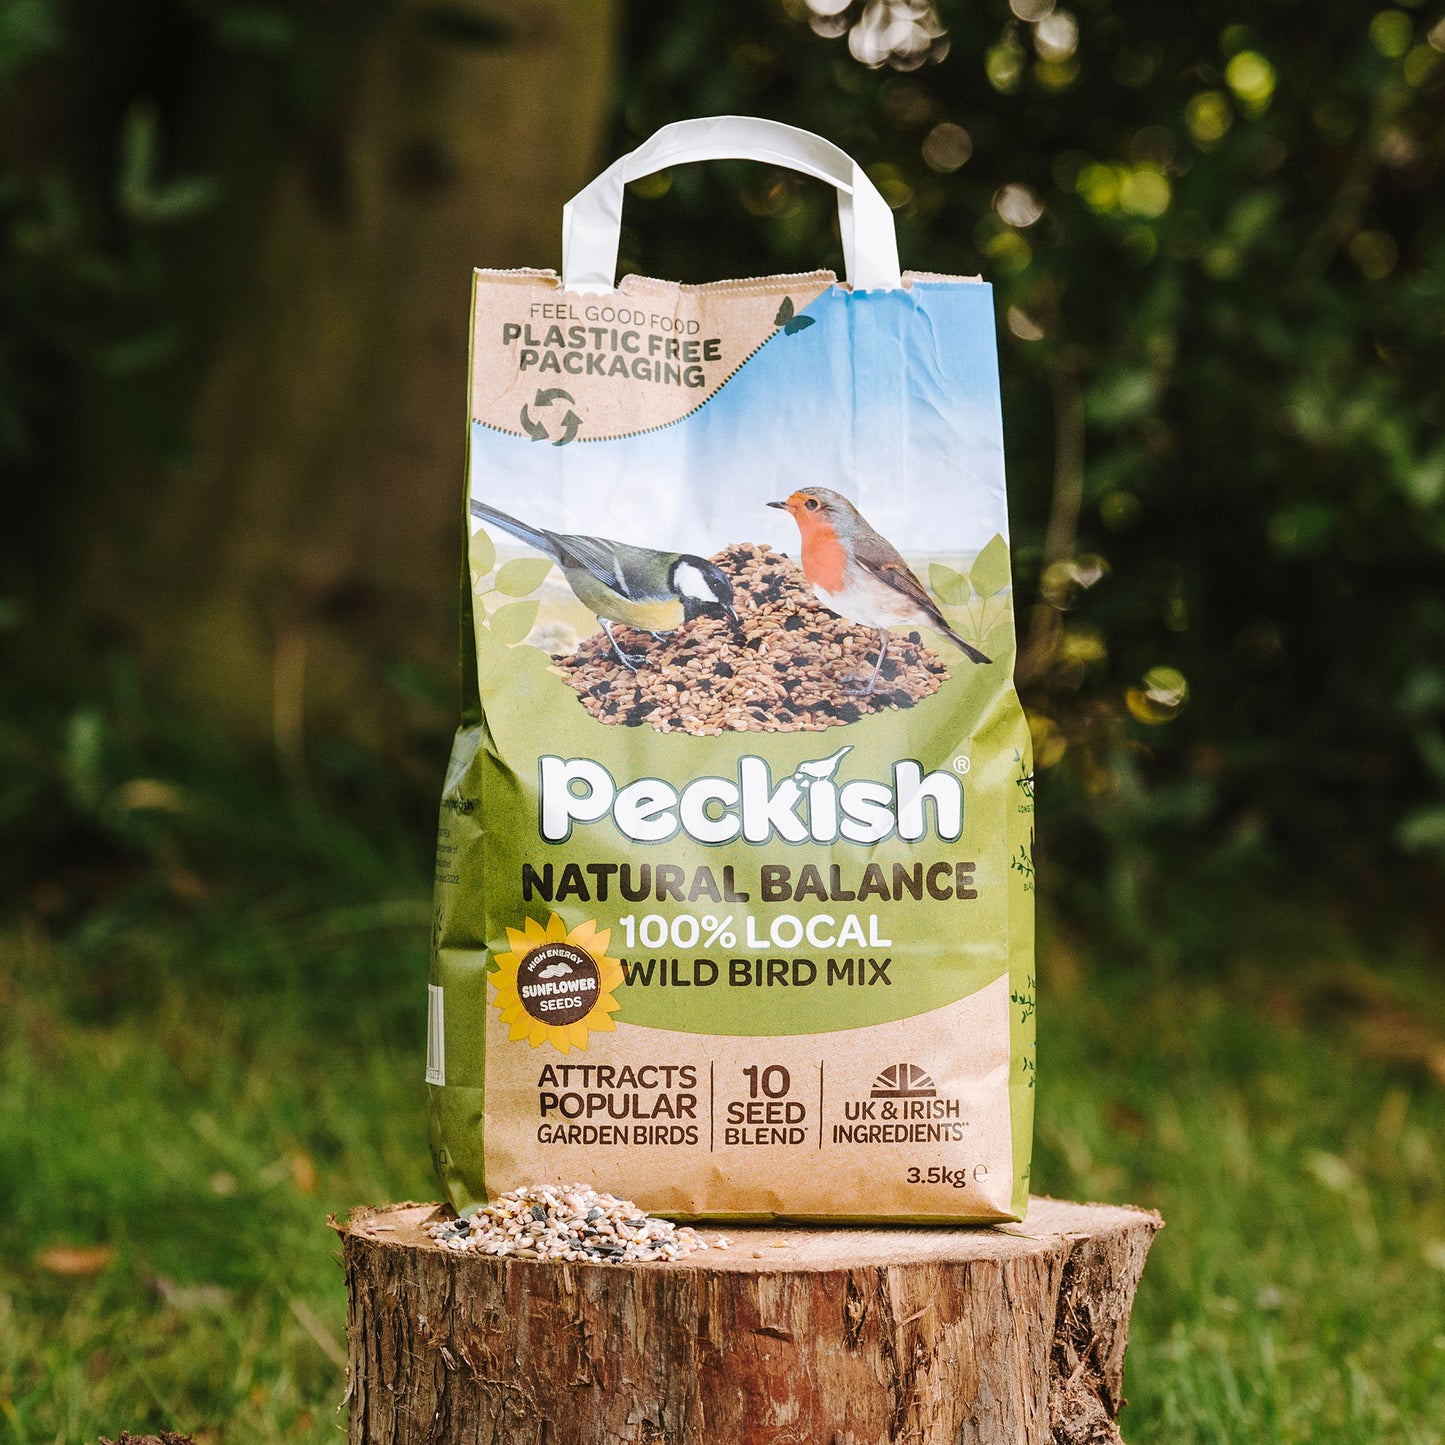 Peckish Natural Balance Seed Mix in packaging 3.5kg